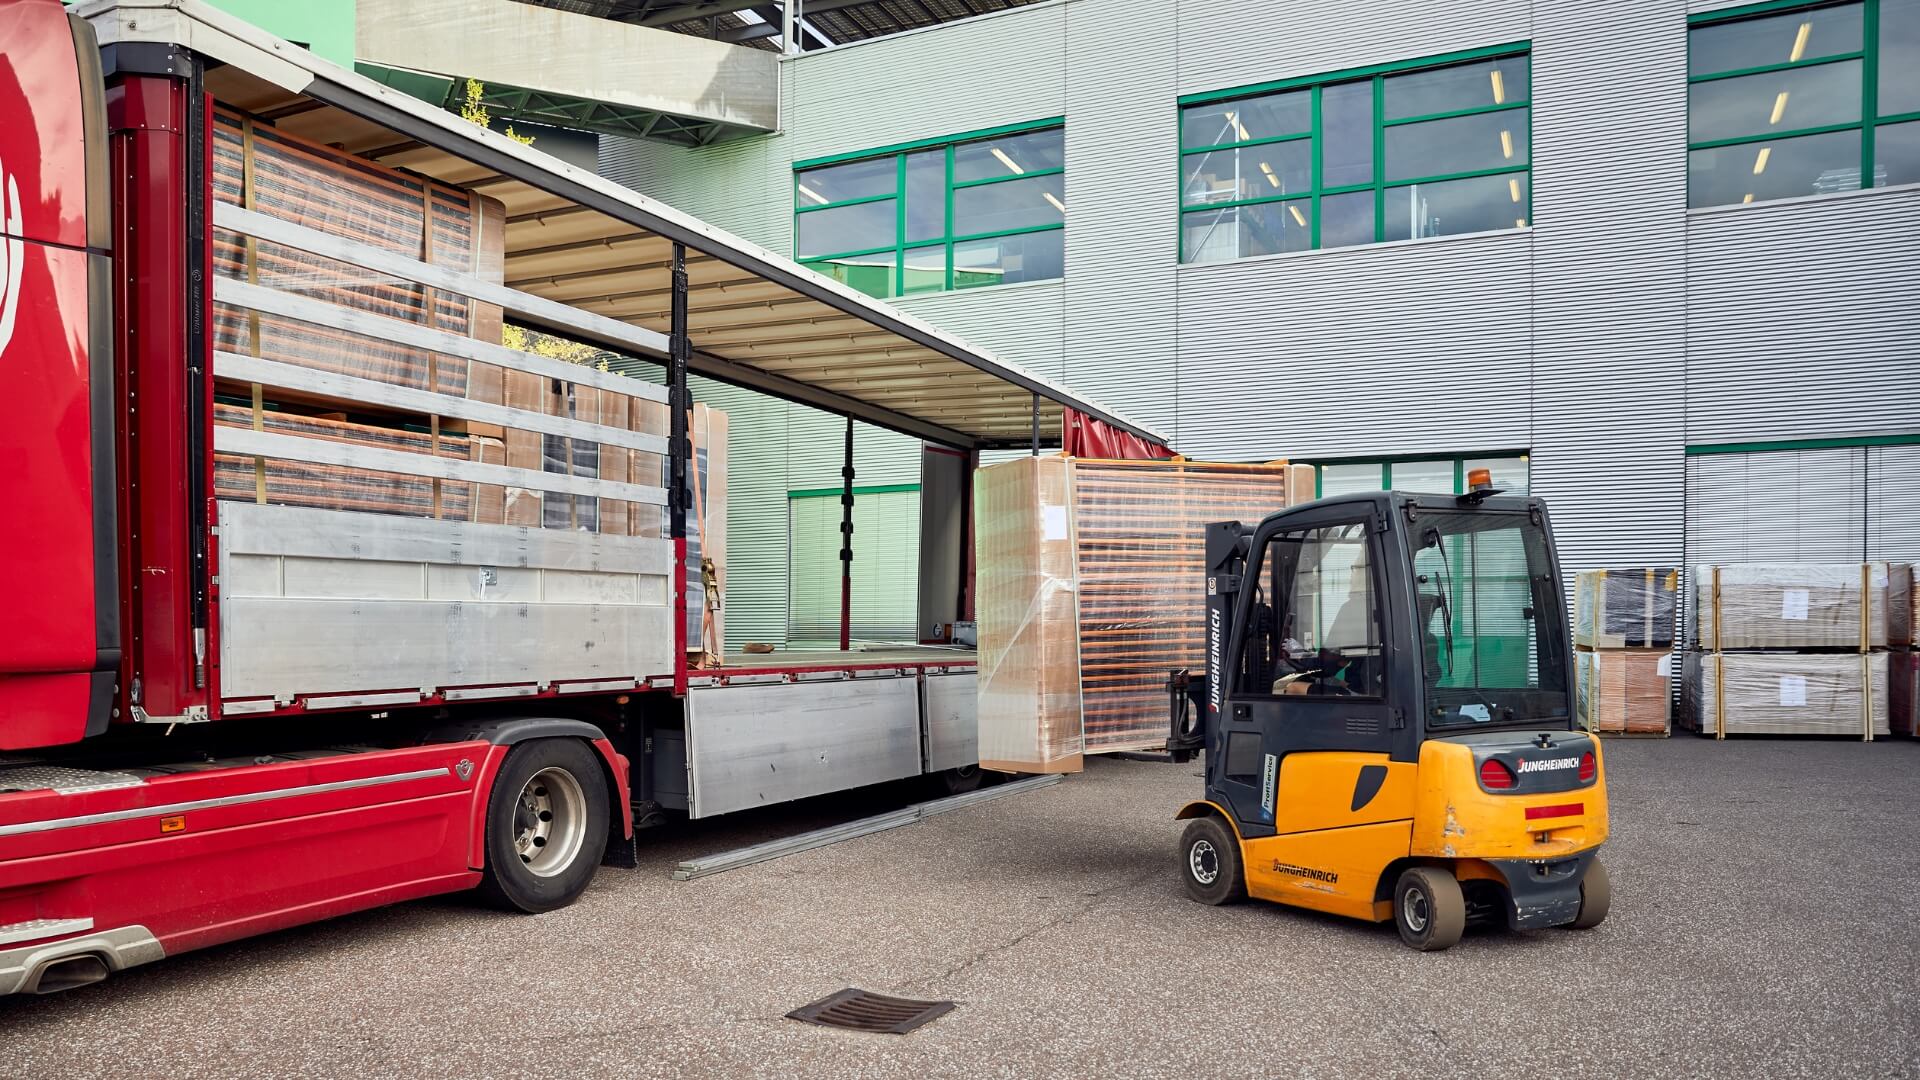 The packaged beer table sets are packed into a truck using a forklift.